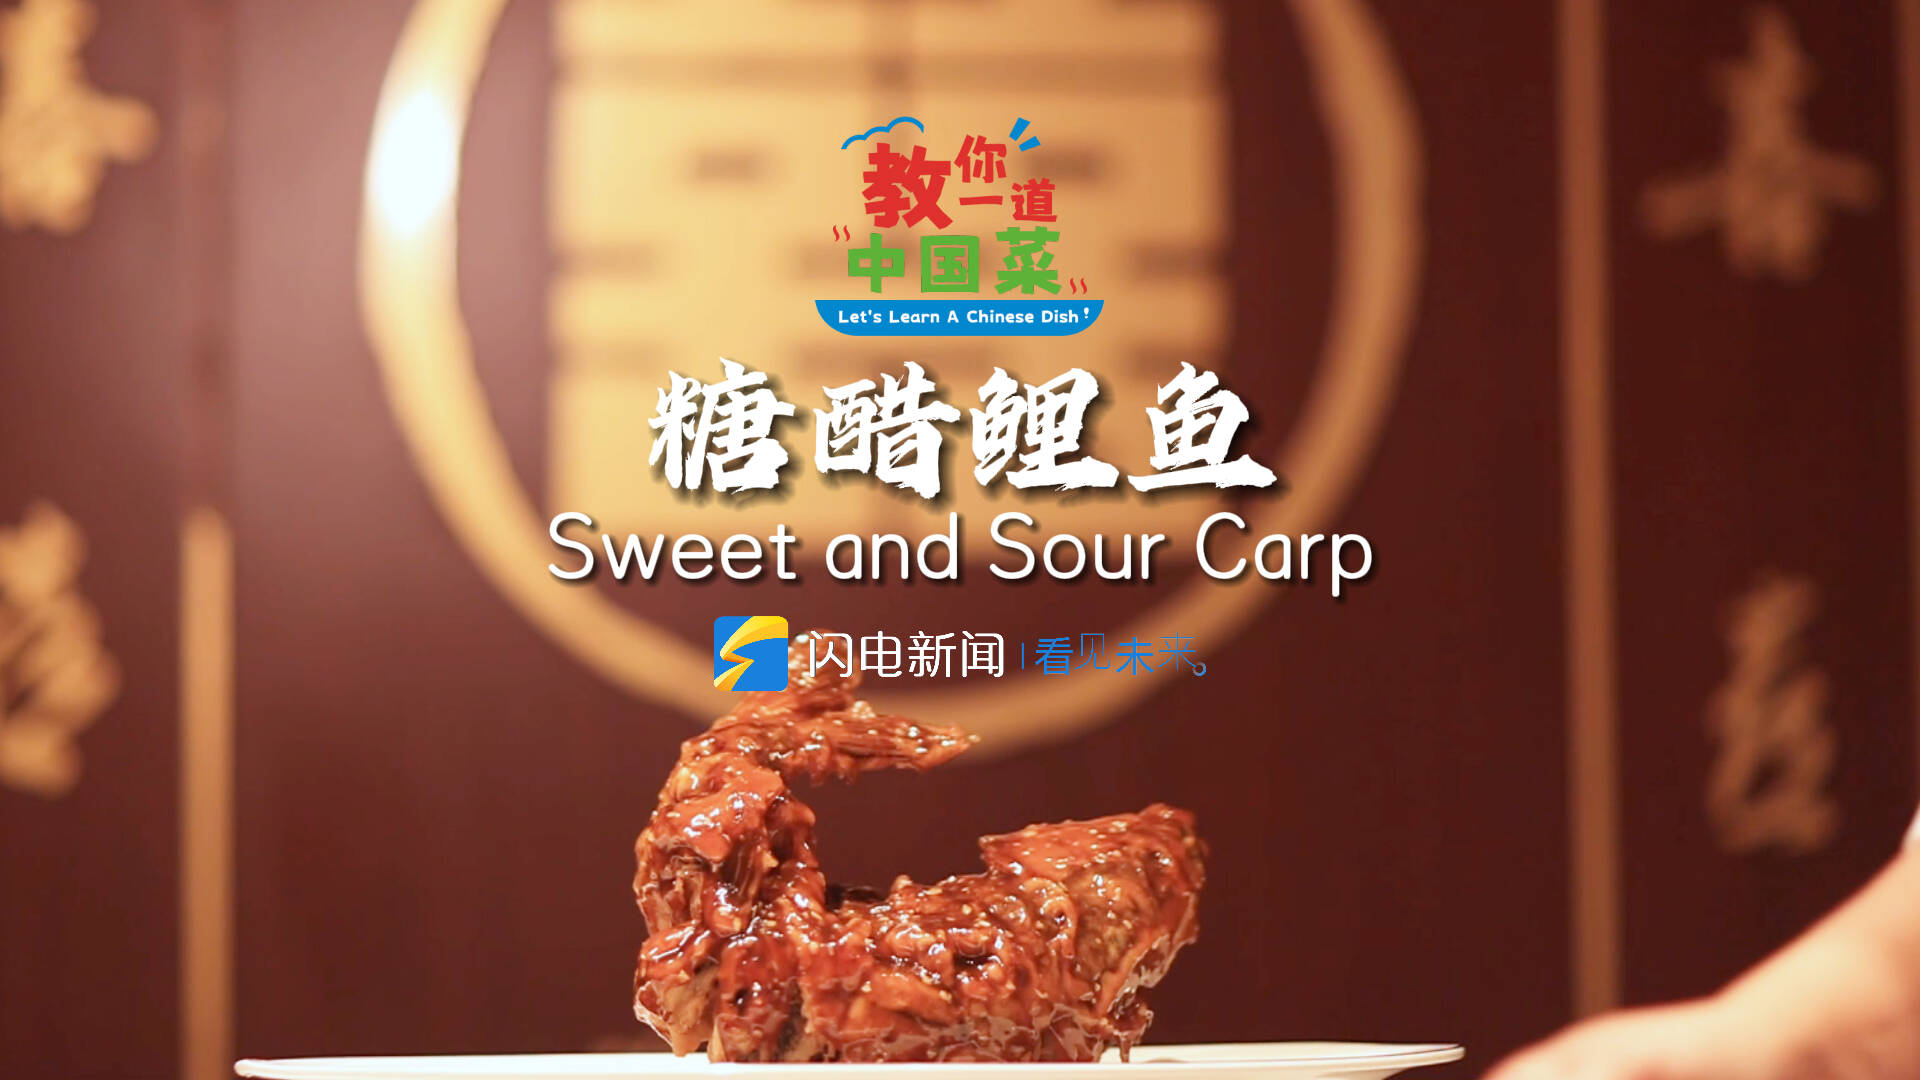 Let's Learn a Chinese Dish丨Sweet and Sour Carp